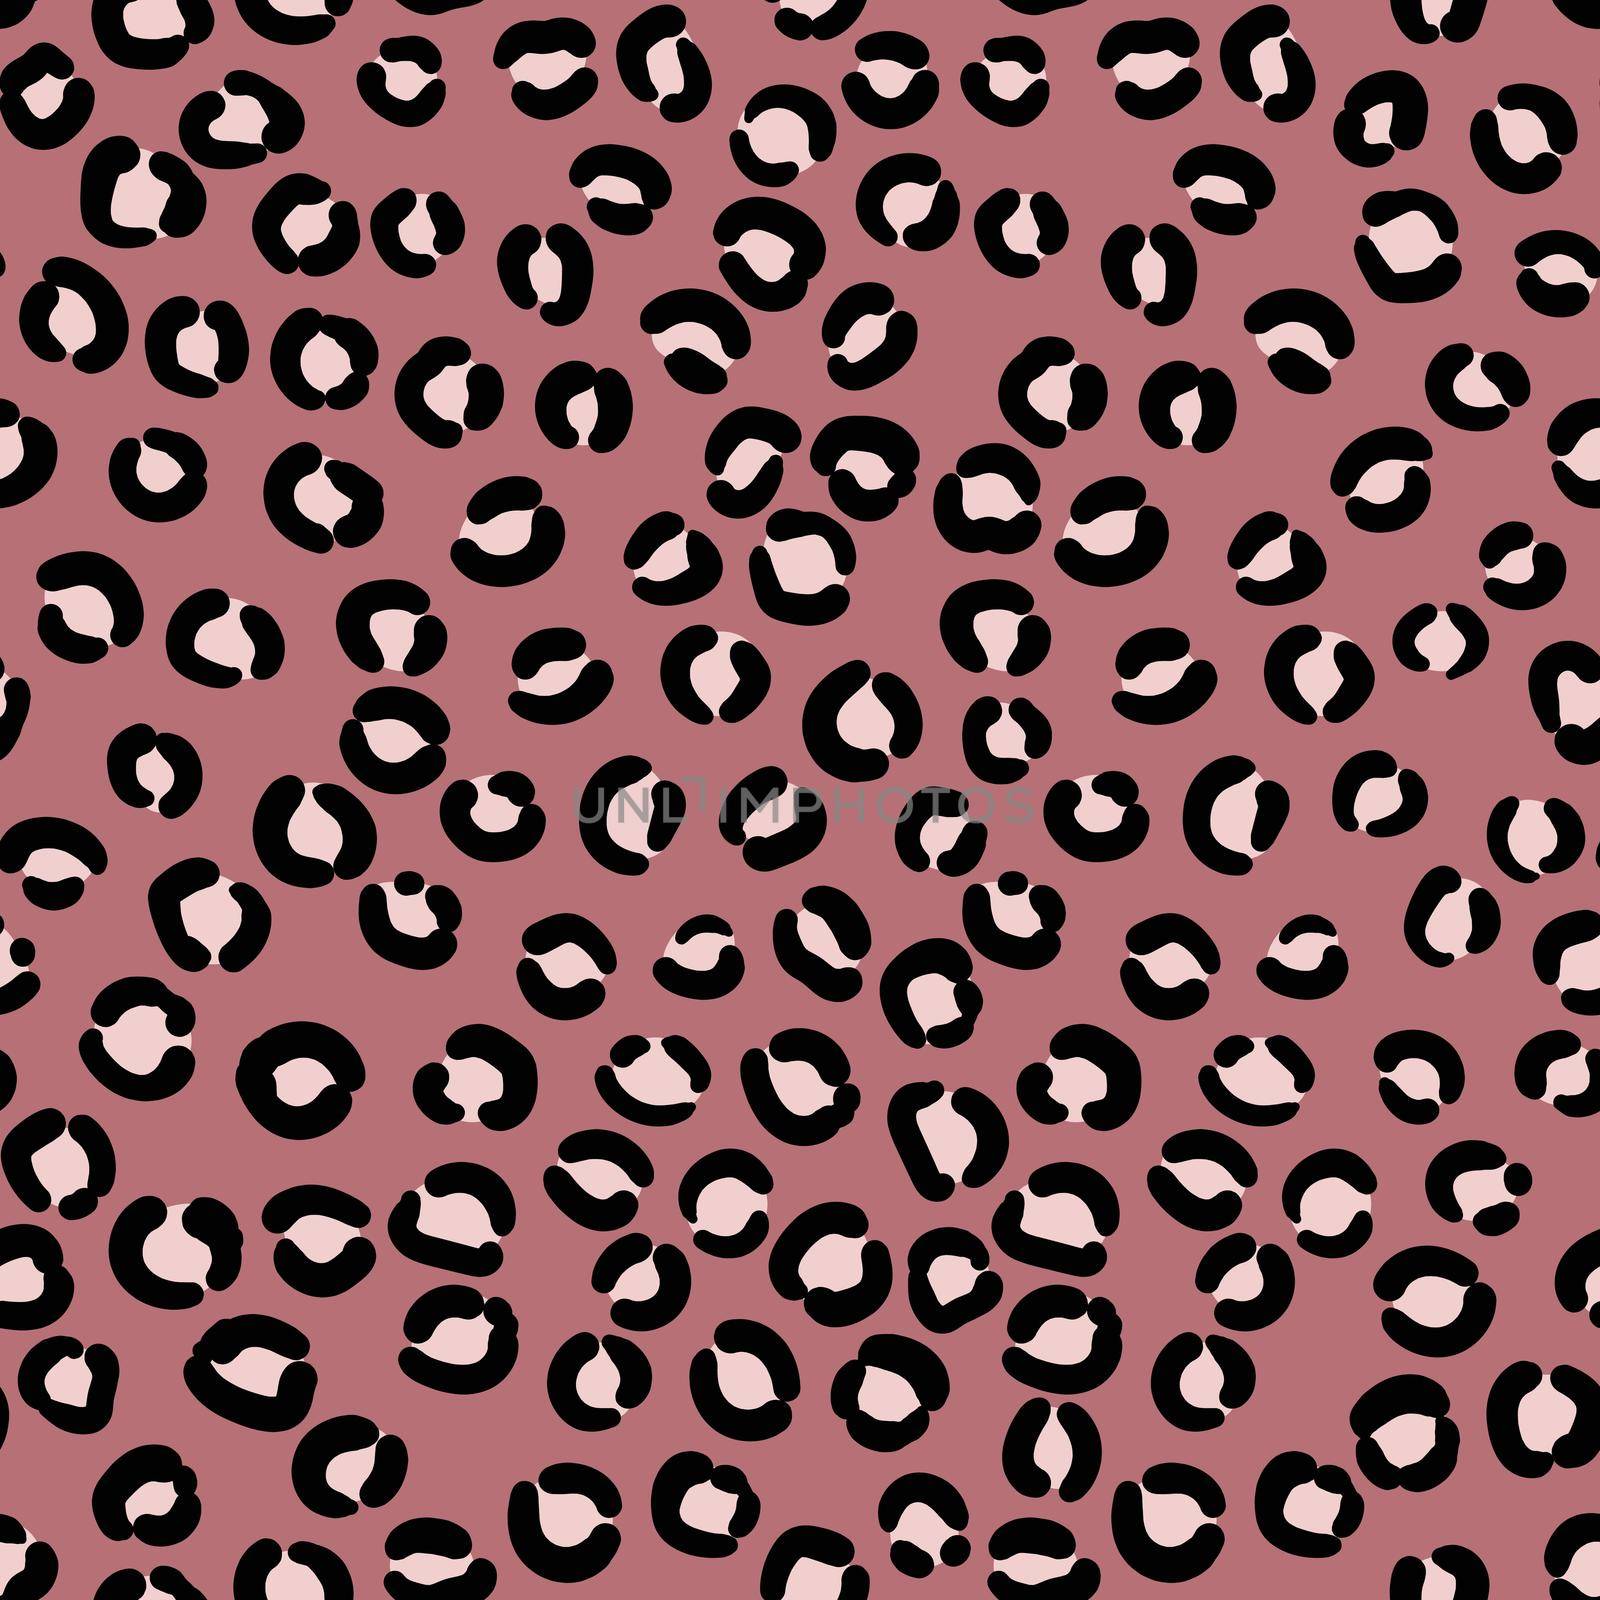 Abstract modern leopard seamless pattern. Animals trendy background. Pink and black decorative vector stock illustration for print, card, postcard, fabric, textile. Modern ornament of stylized skin by allaku